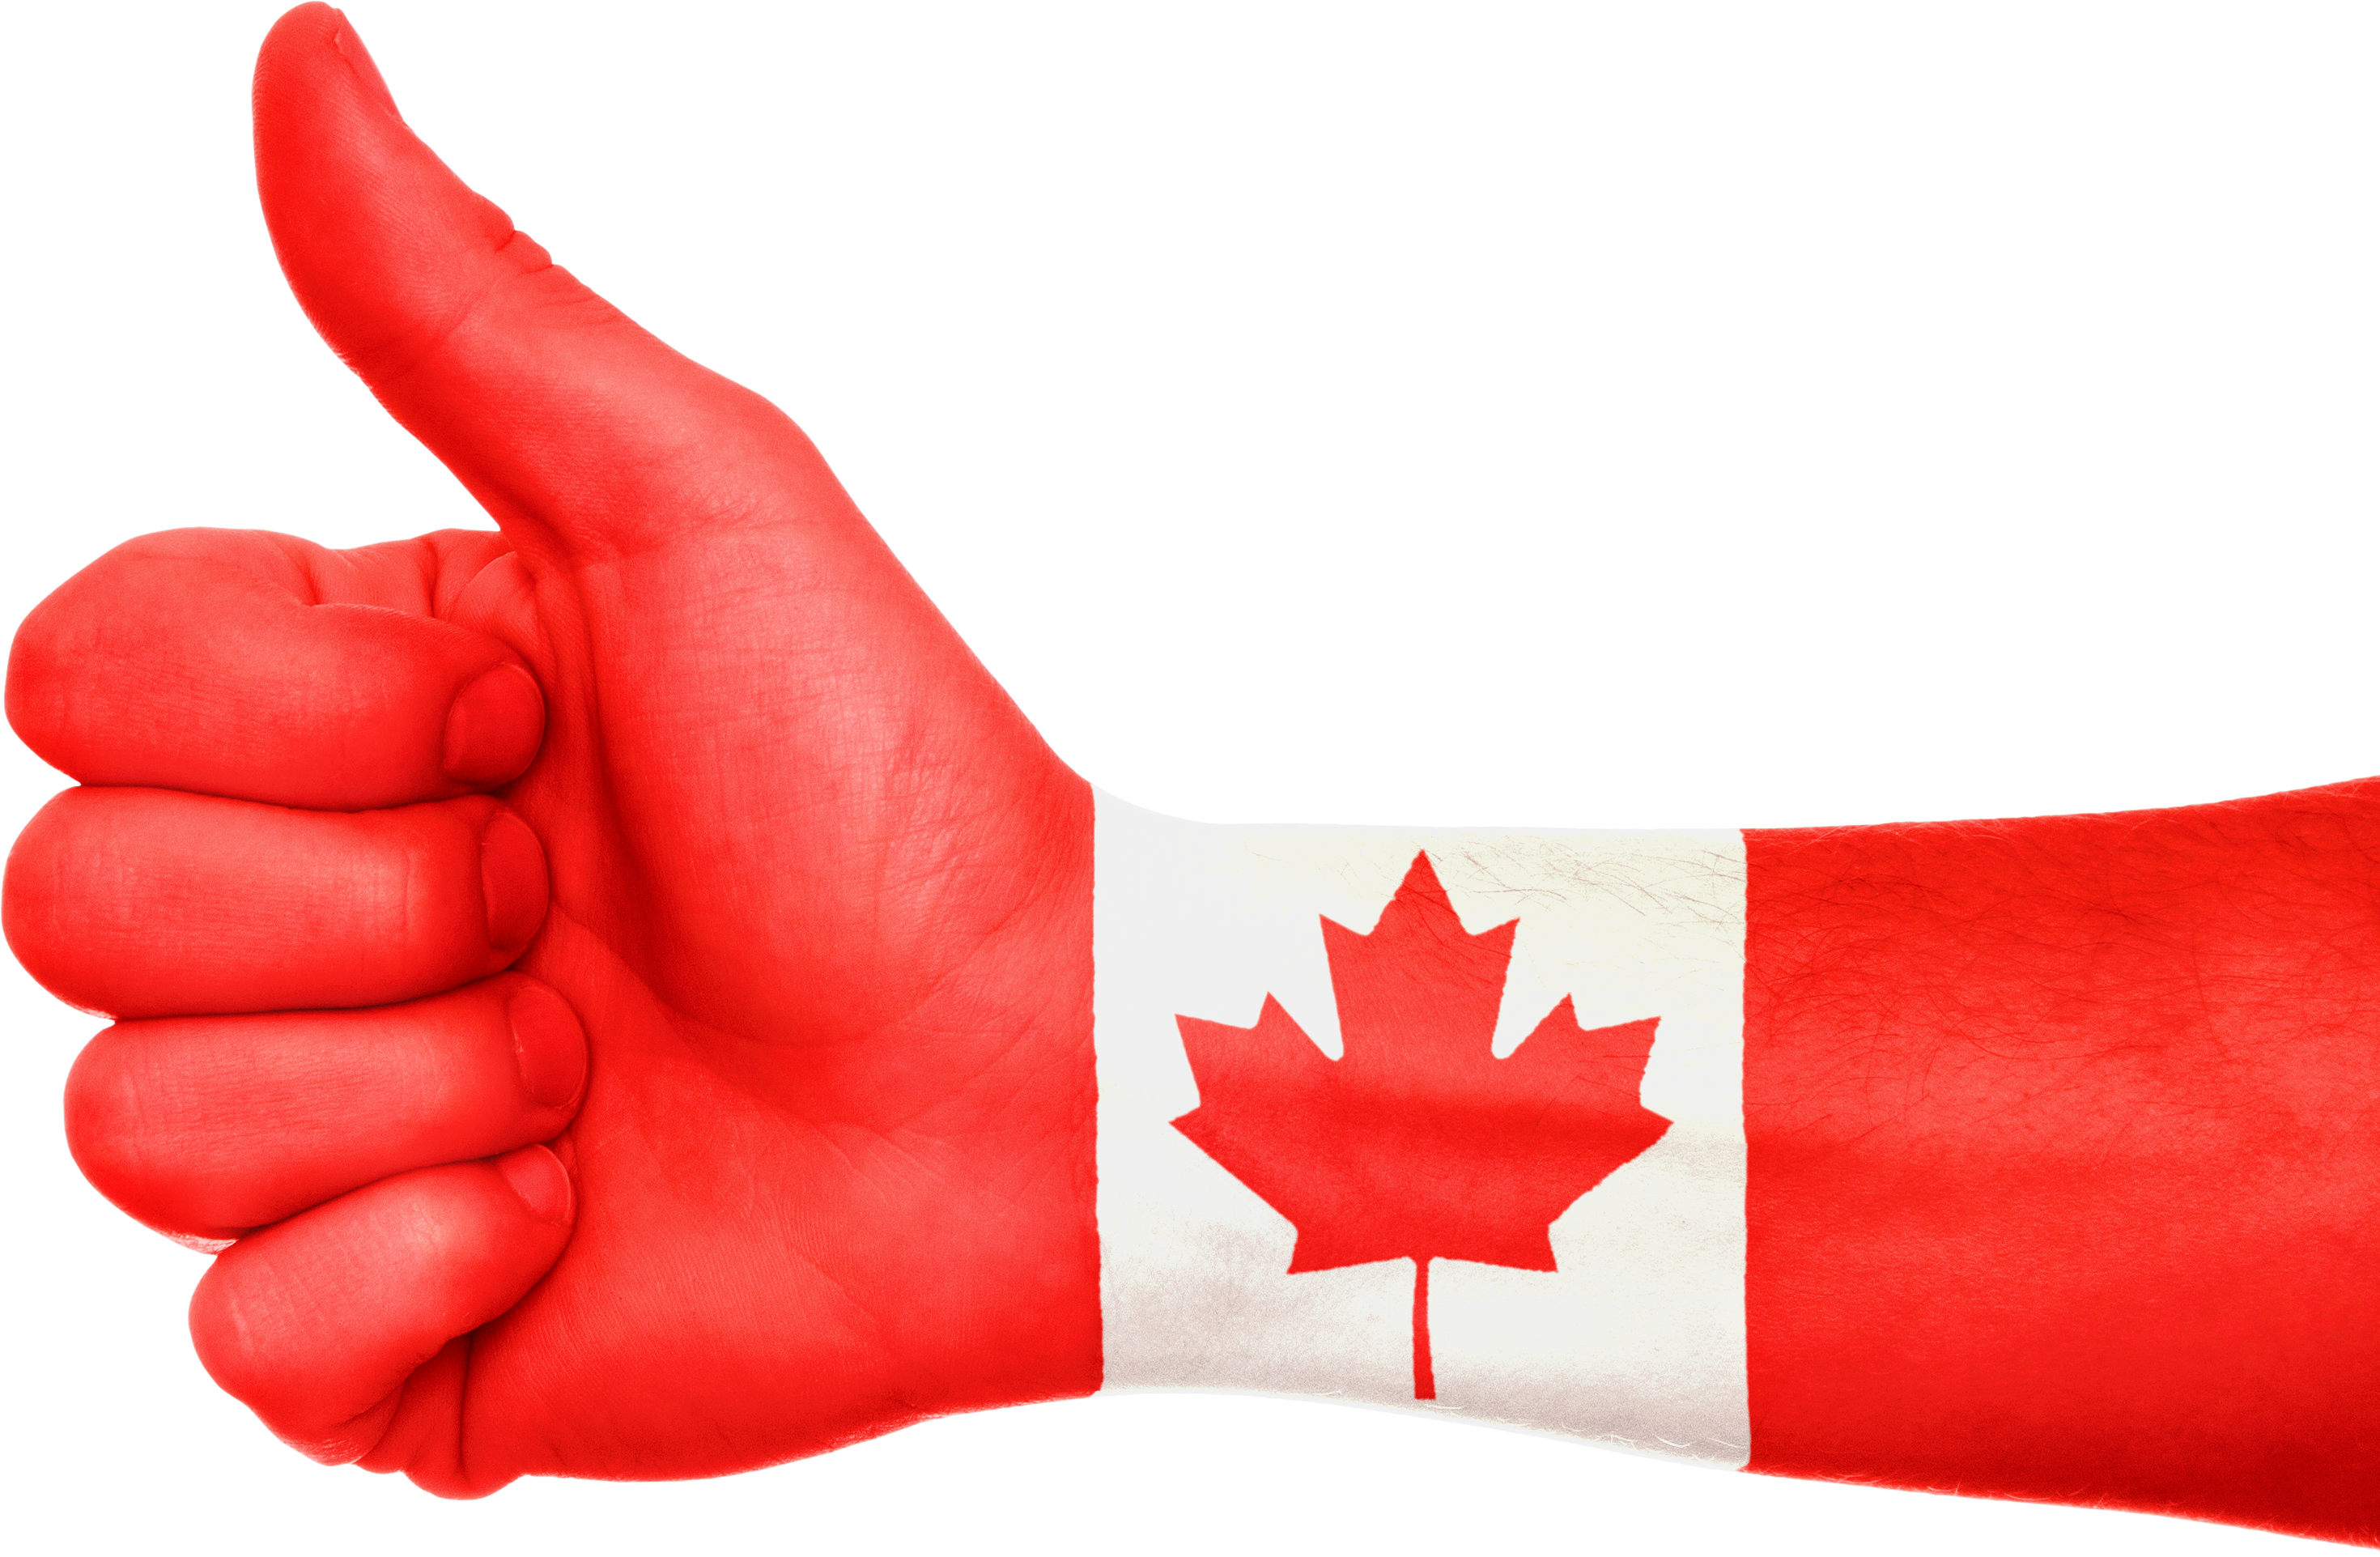 How to Immigrate to Canada: the top 10 ways approved by the Canadian Government